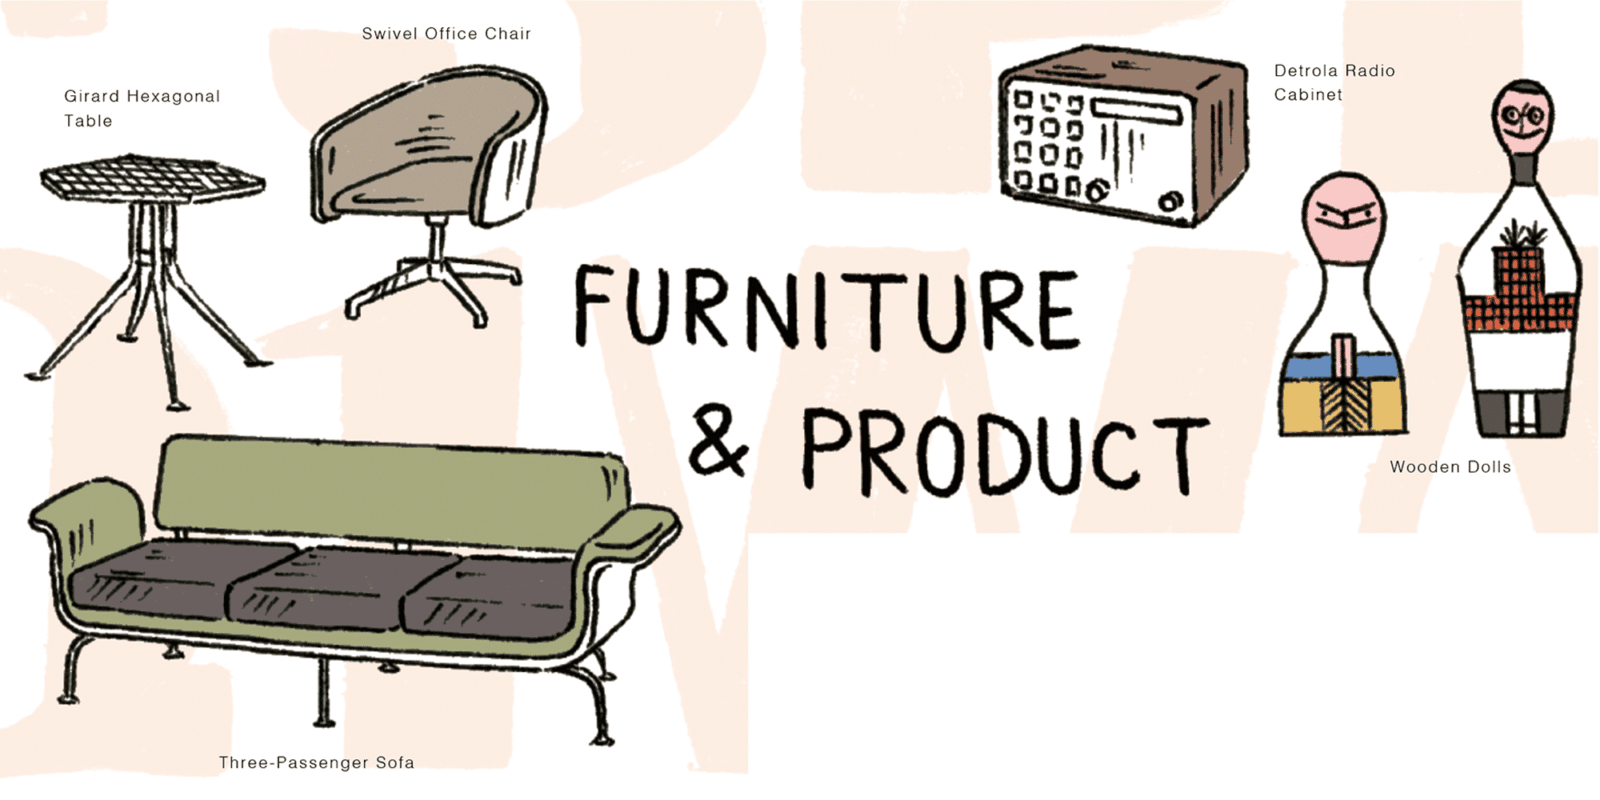 FURNITURE & PRODUCT